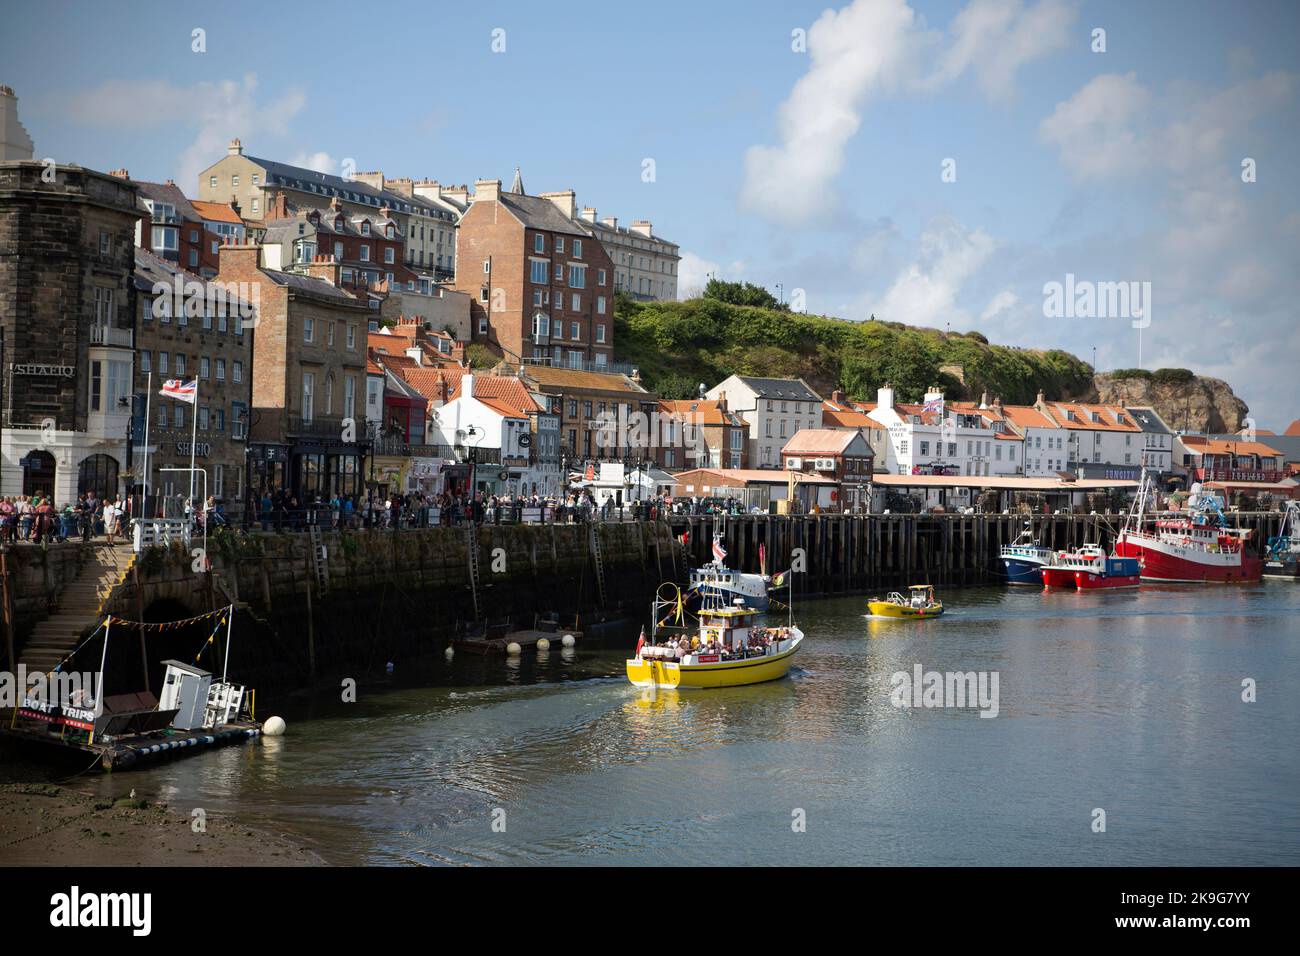 The seaside town of Whitby in North Yorkshire, England. Stock Photo